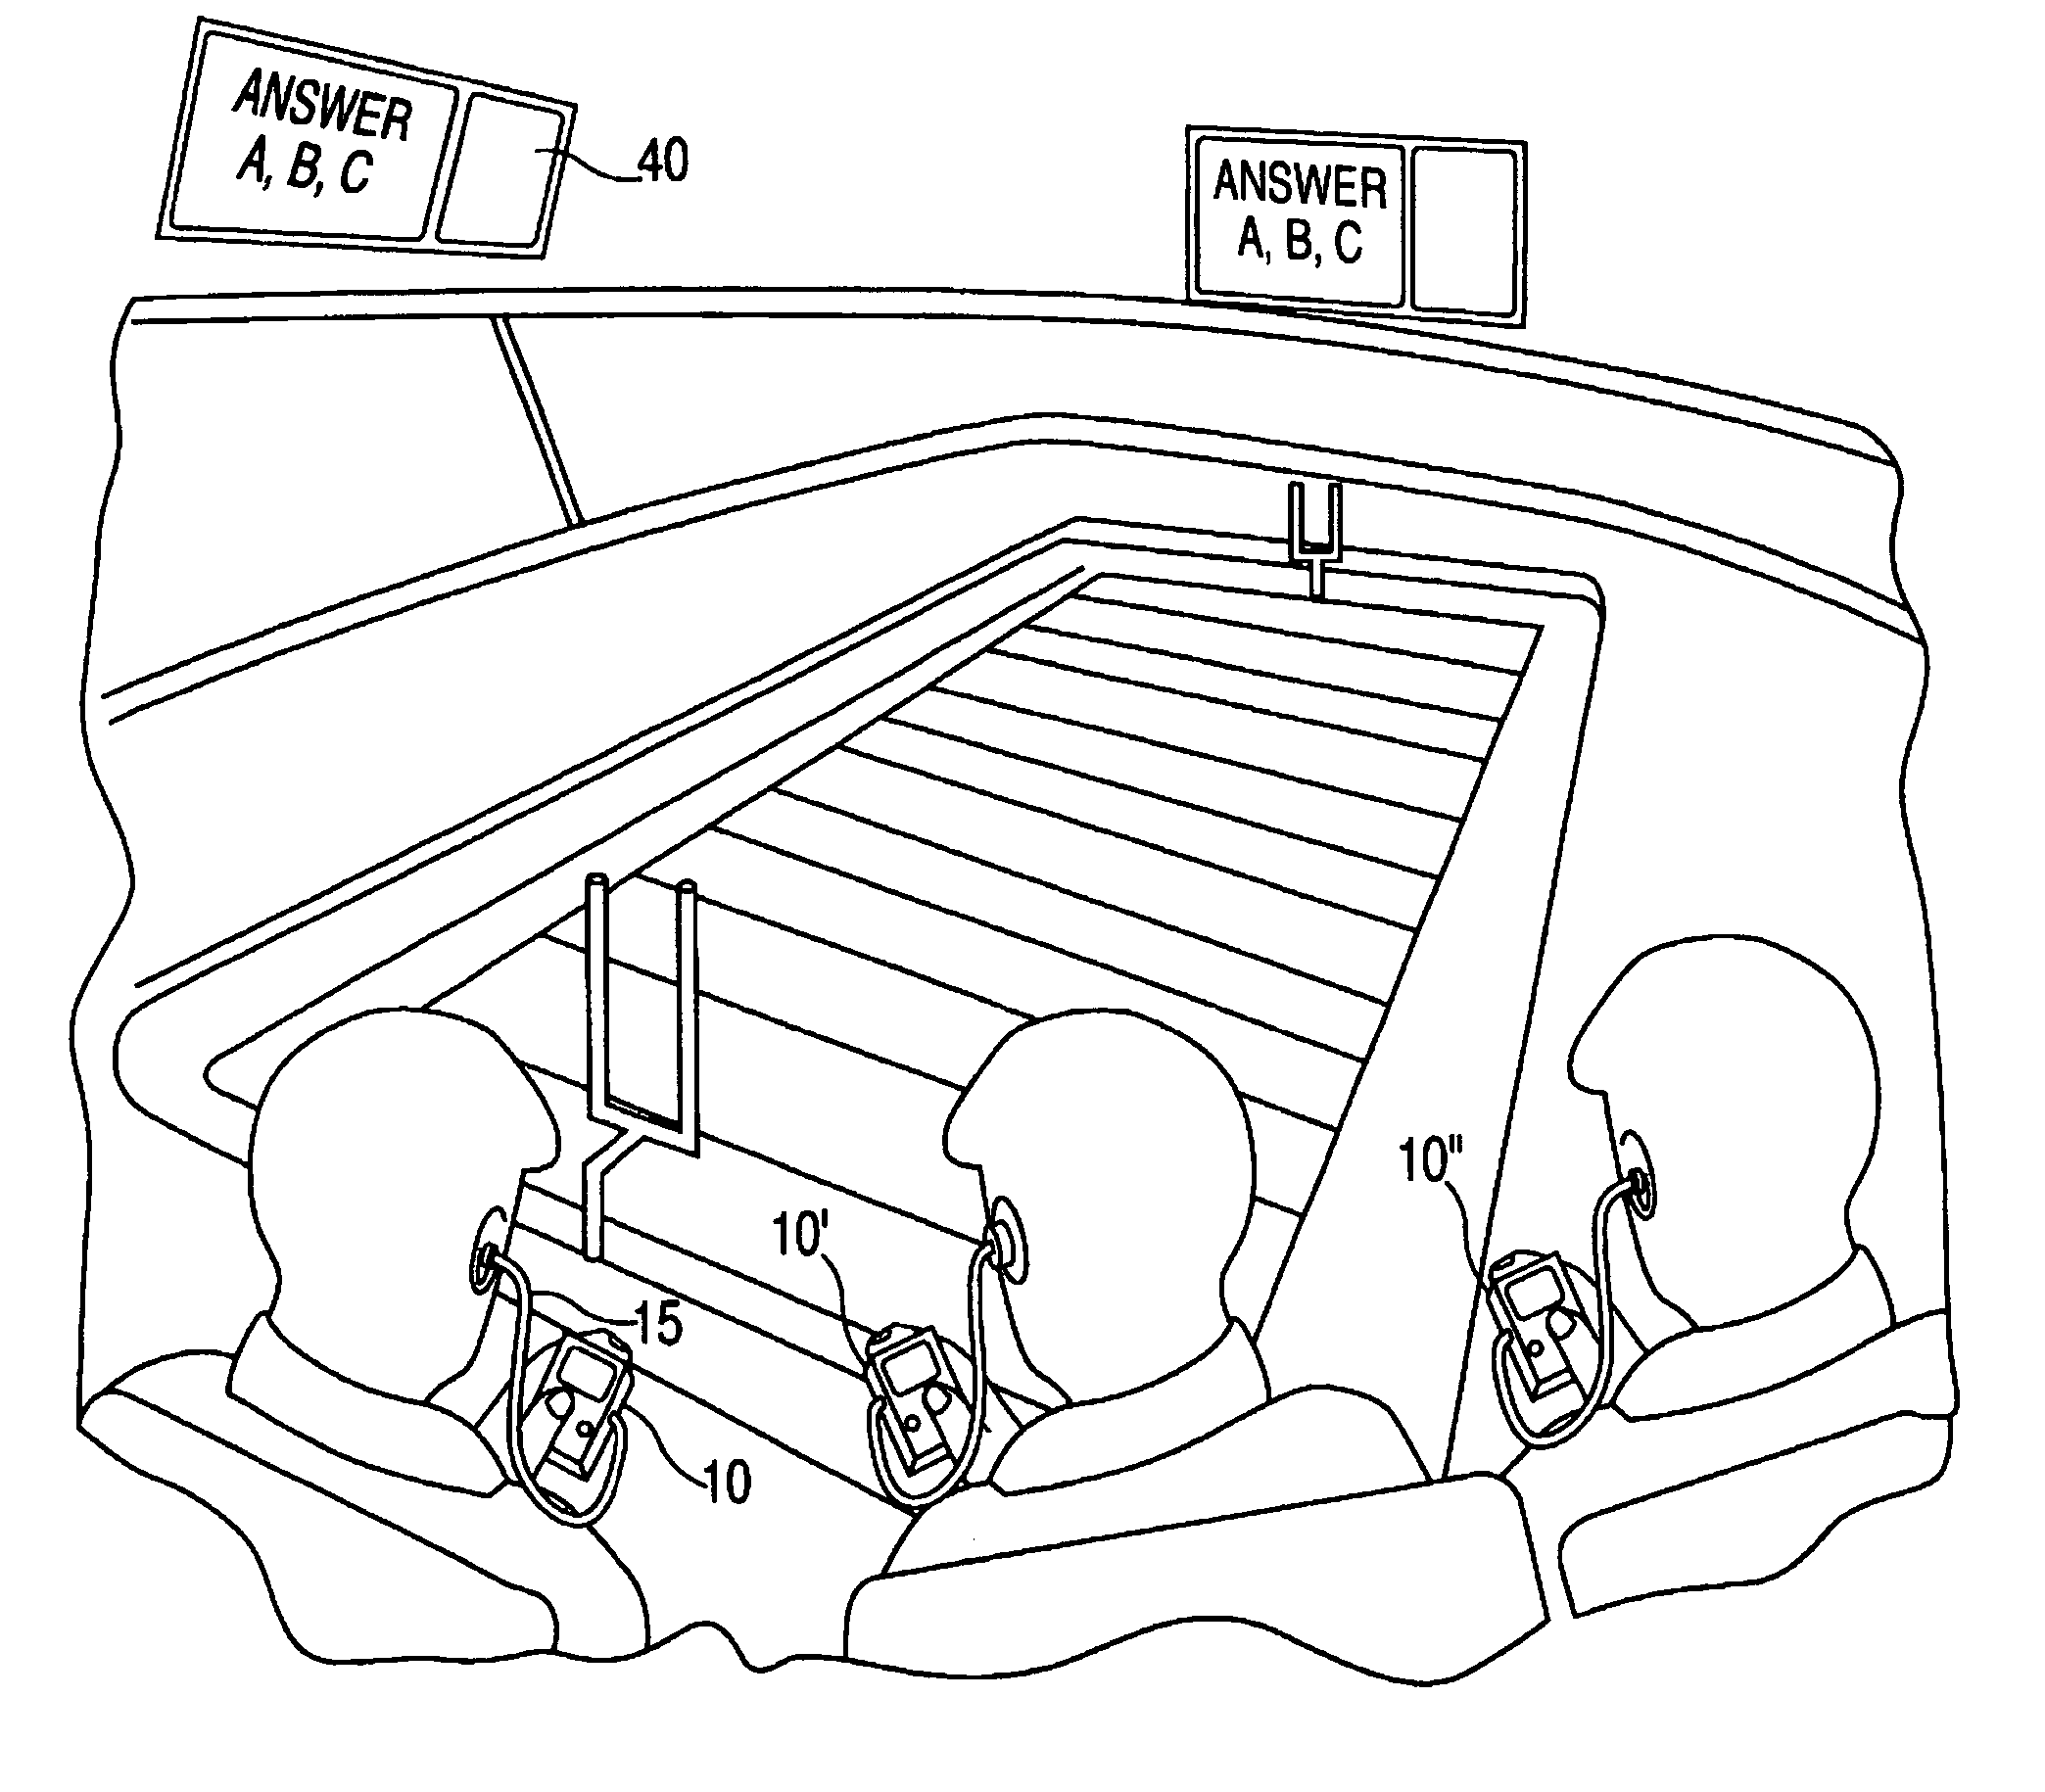 Method and apparatus for interactive audience participation at a live spectator event